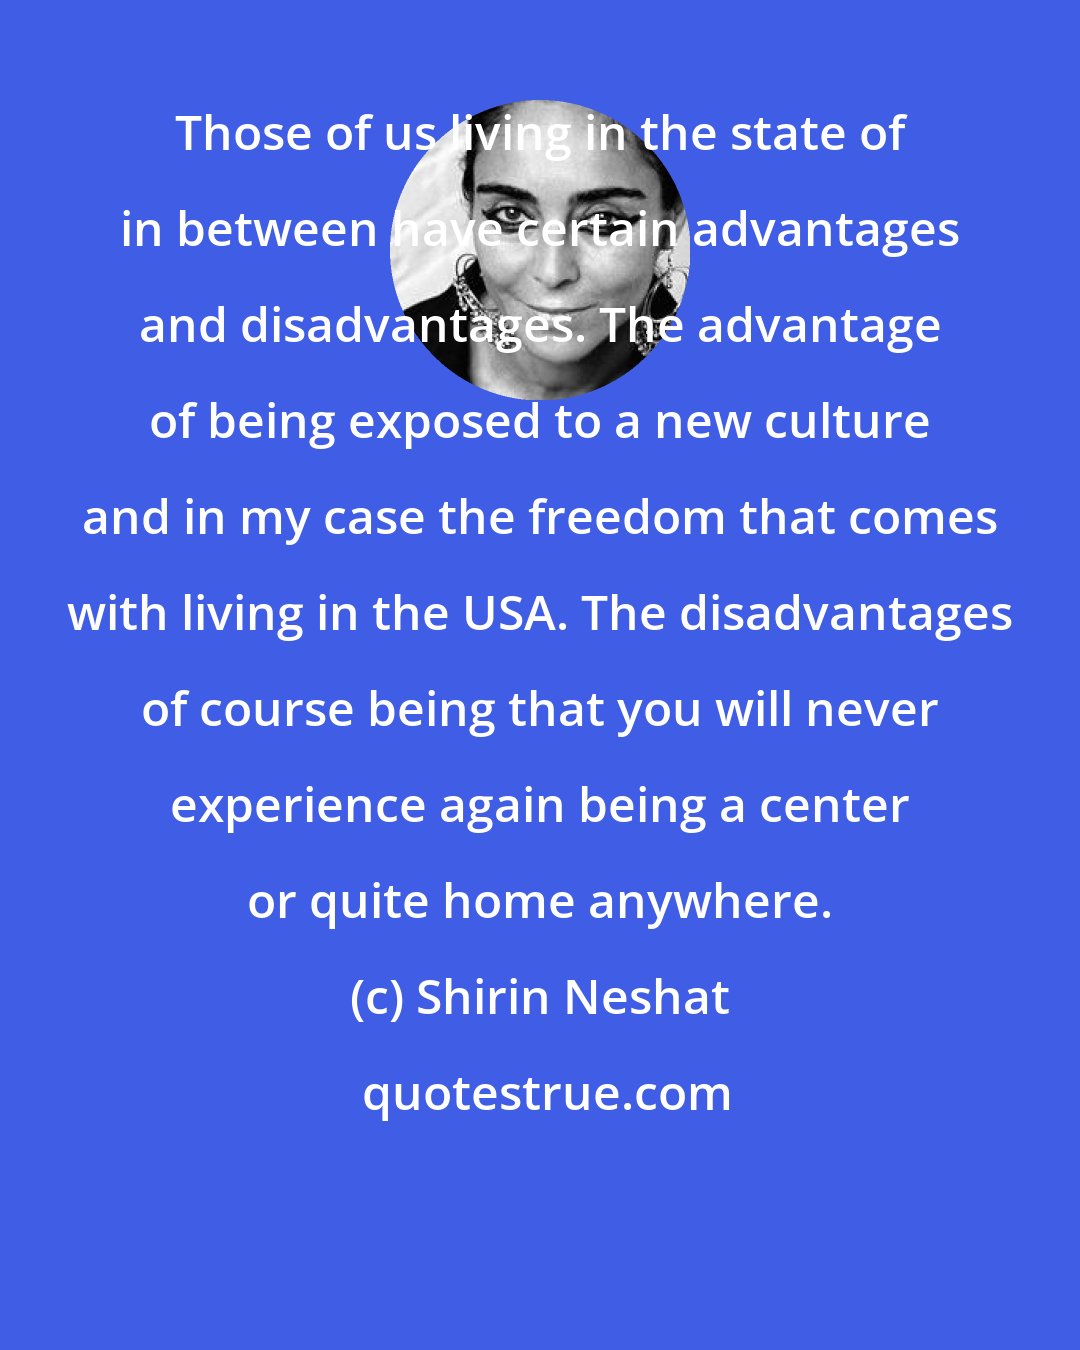 Shirin Neshat: Those of us living in the state of in between have certain advantages and disadvantages. The advantage of being exposed to a new culture and in my case the freedom that comes with living in the USA. The disadvantages of course being that you will never experience again being a center or quite home anywhere.